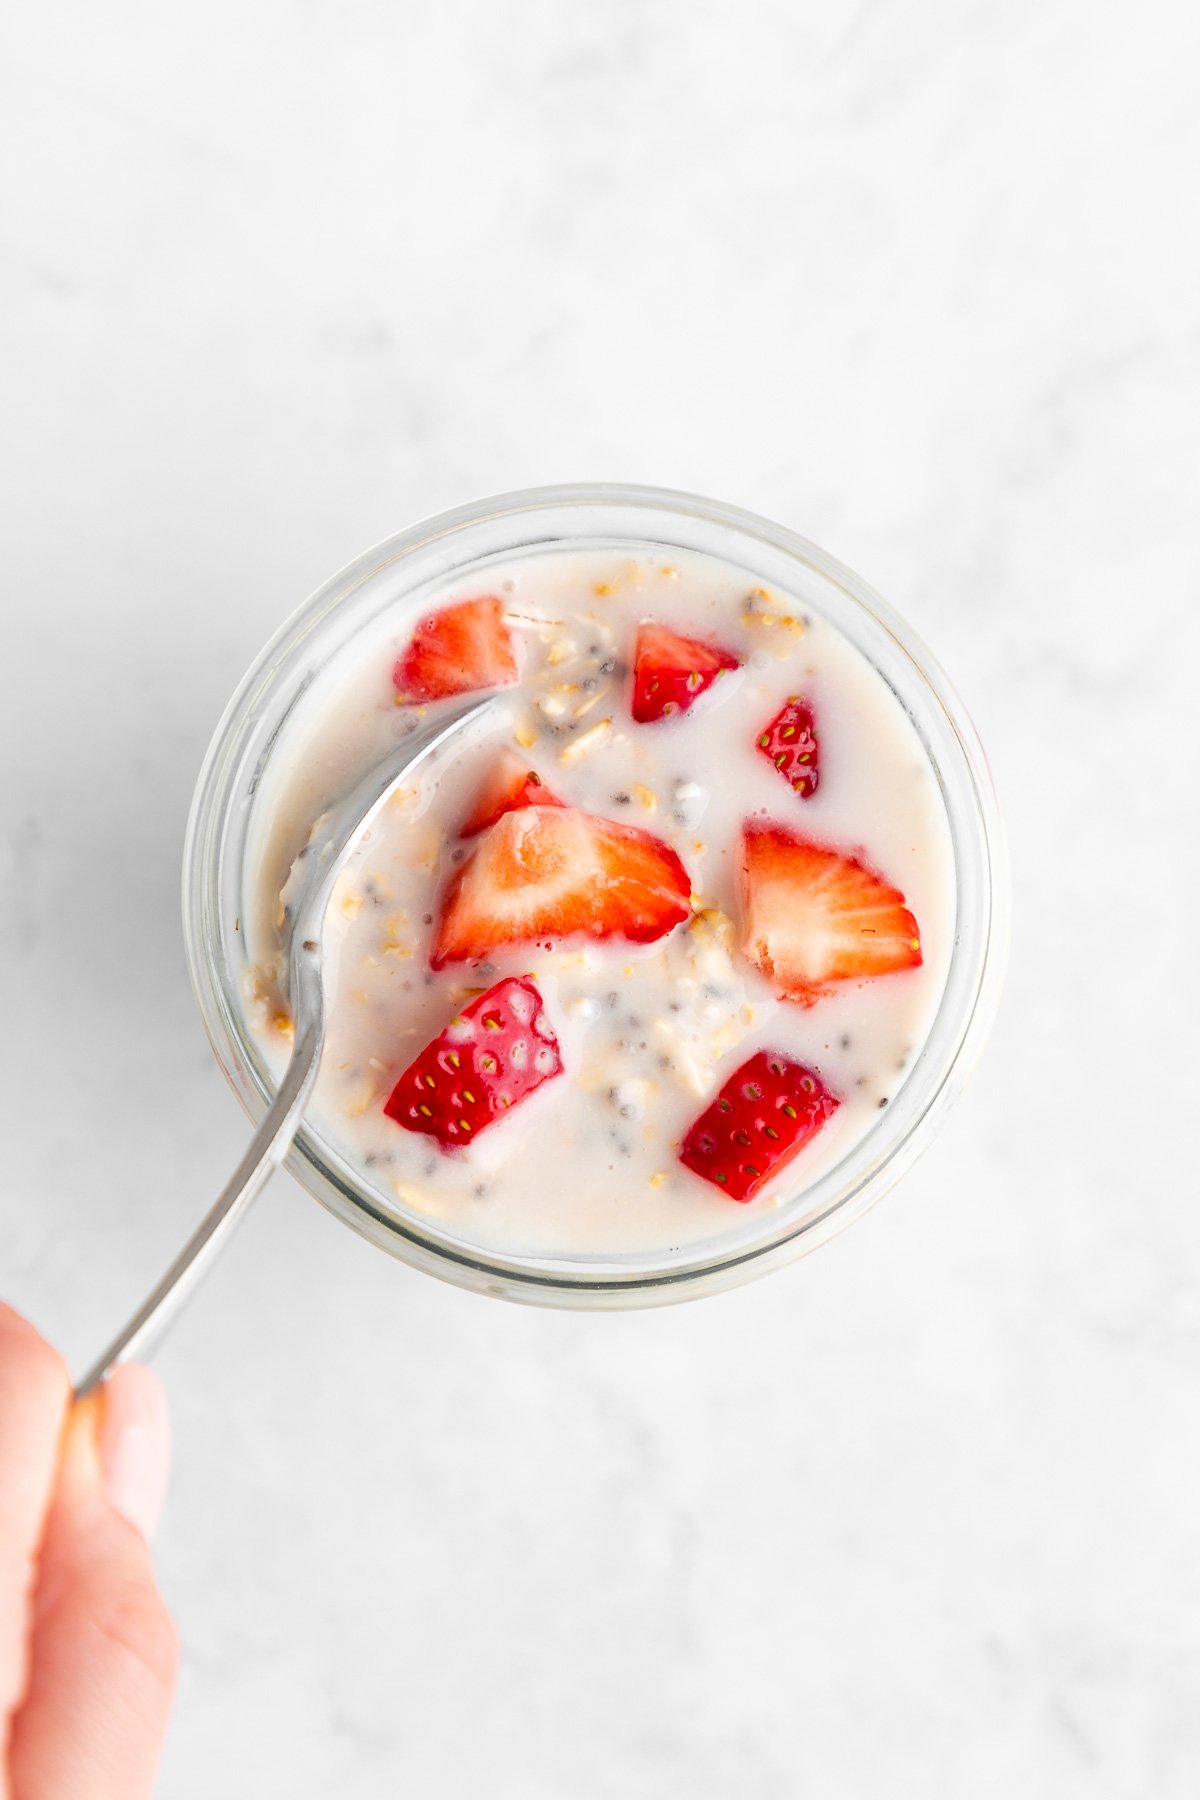 a hand holding a spoon mixing strawberries and cream overnight oats in a jar